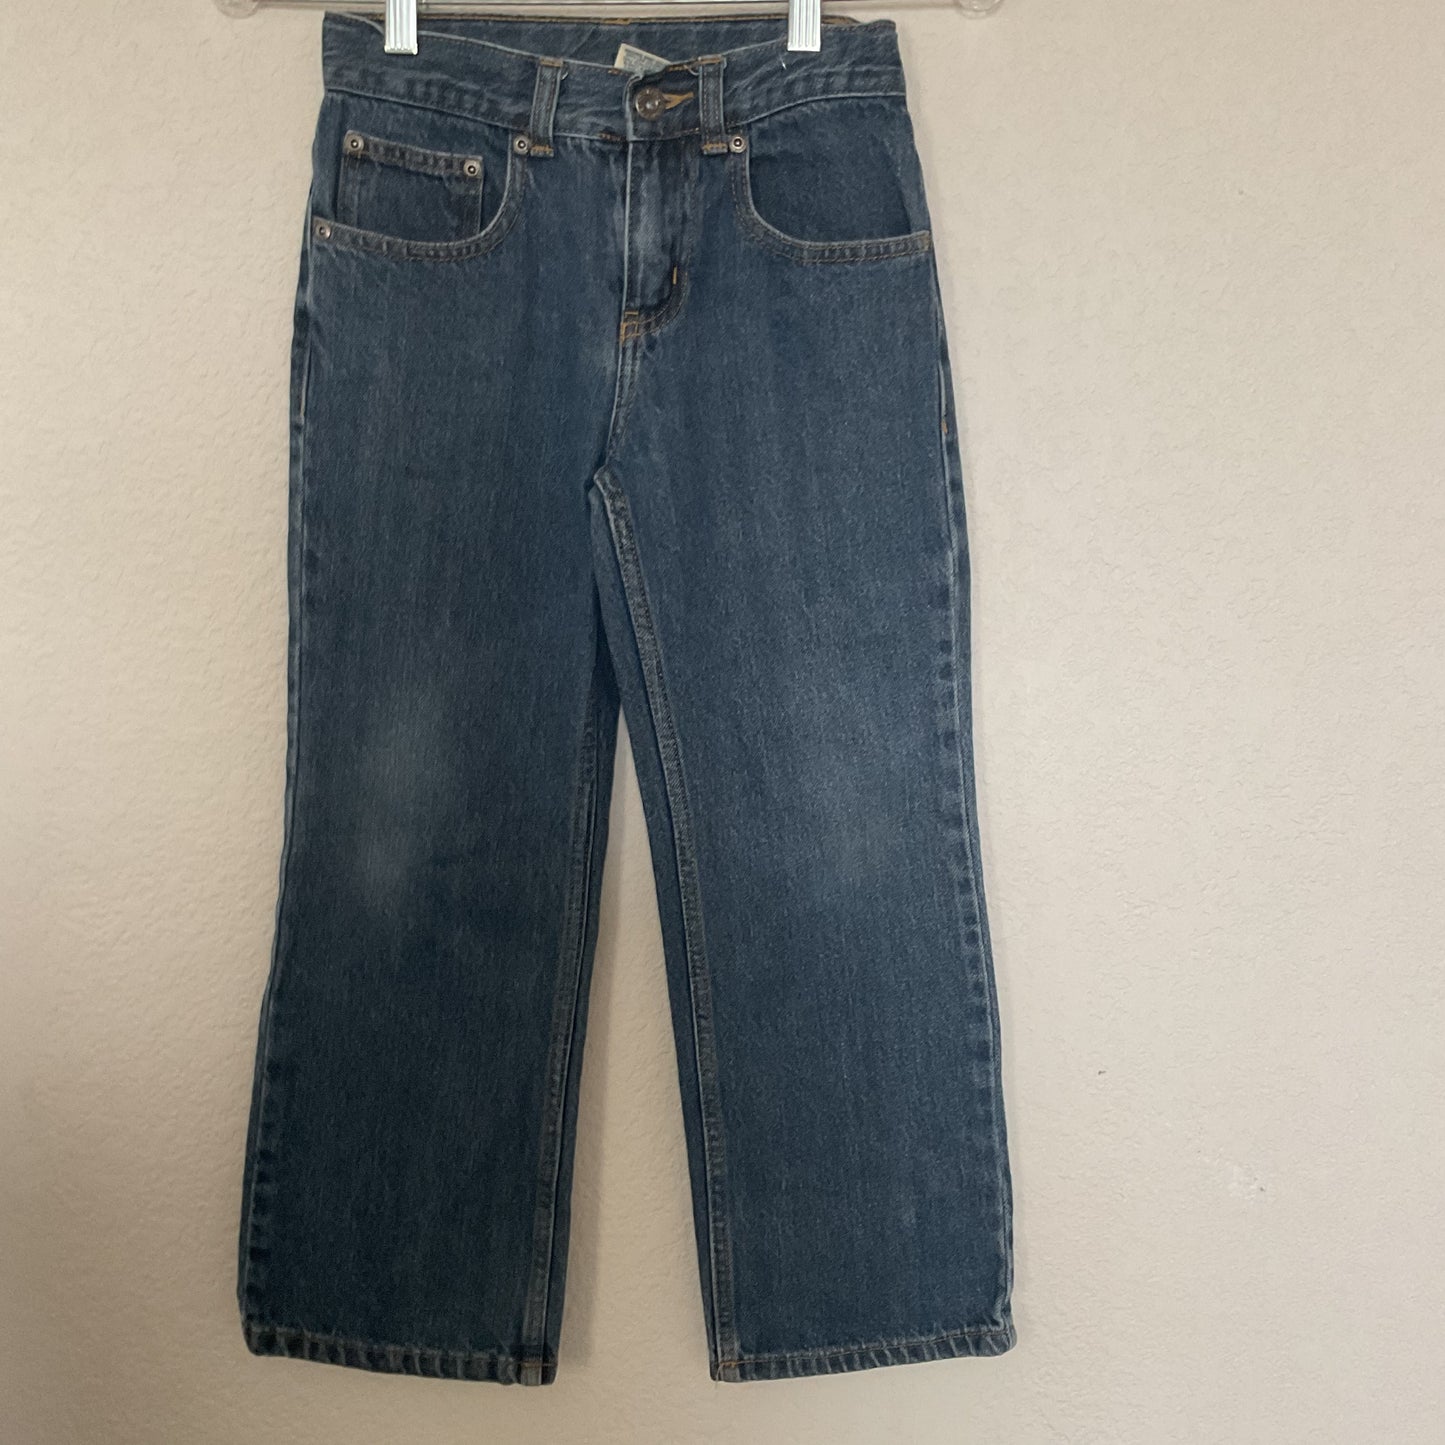 Faded Glory Boys Jeans Size 8R.